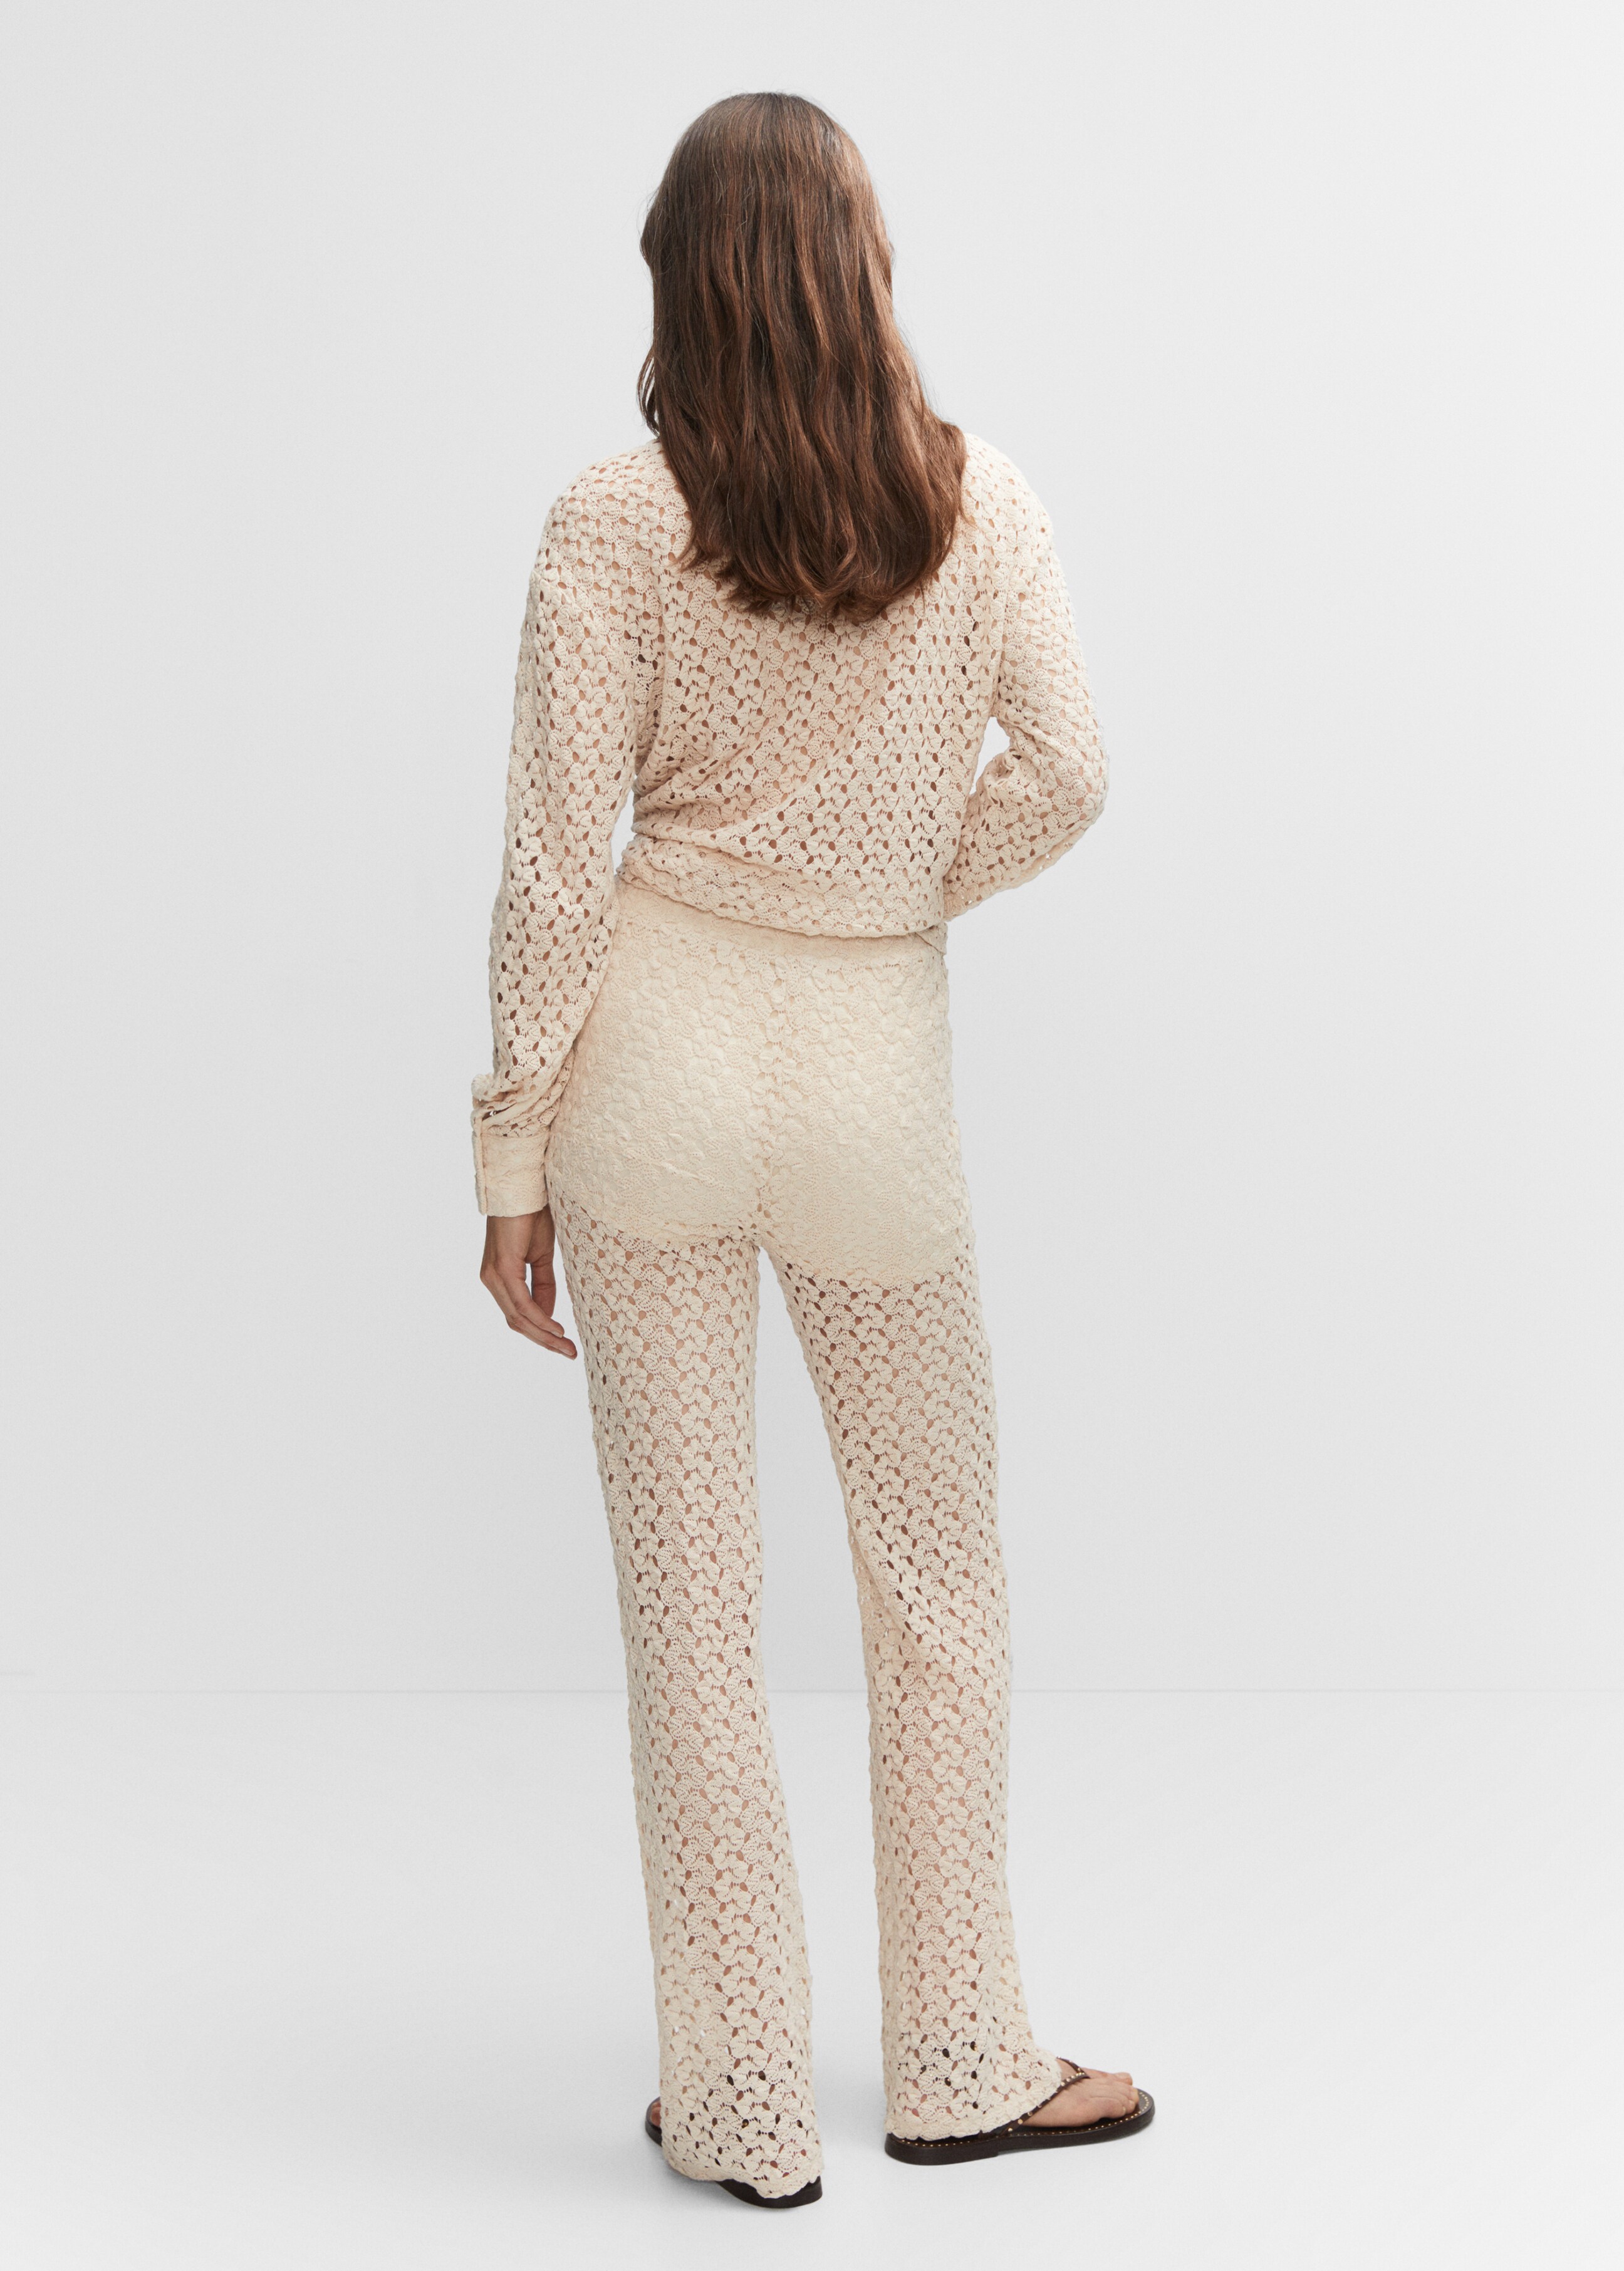 Straight crochet pants - Reverse of the article